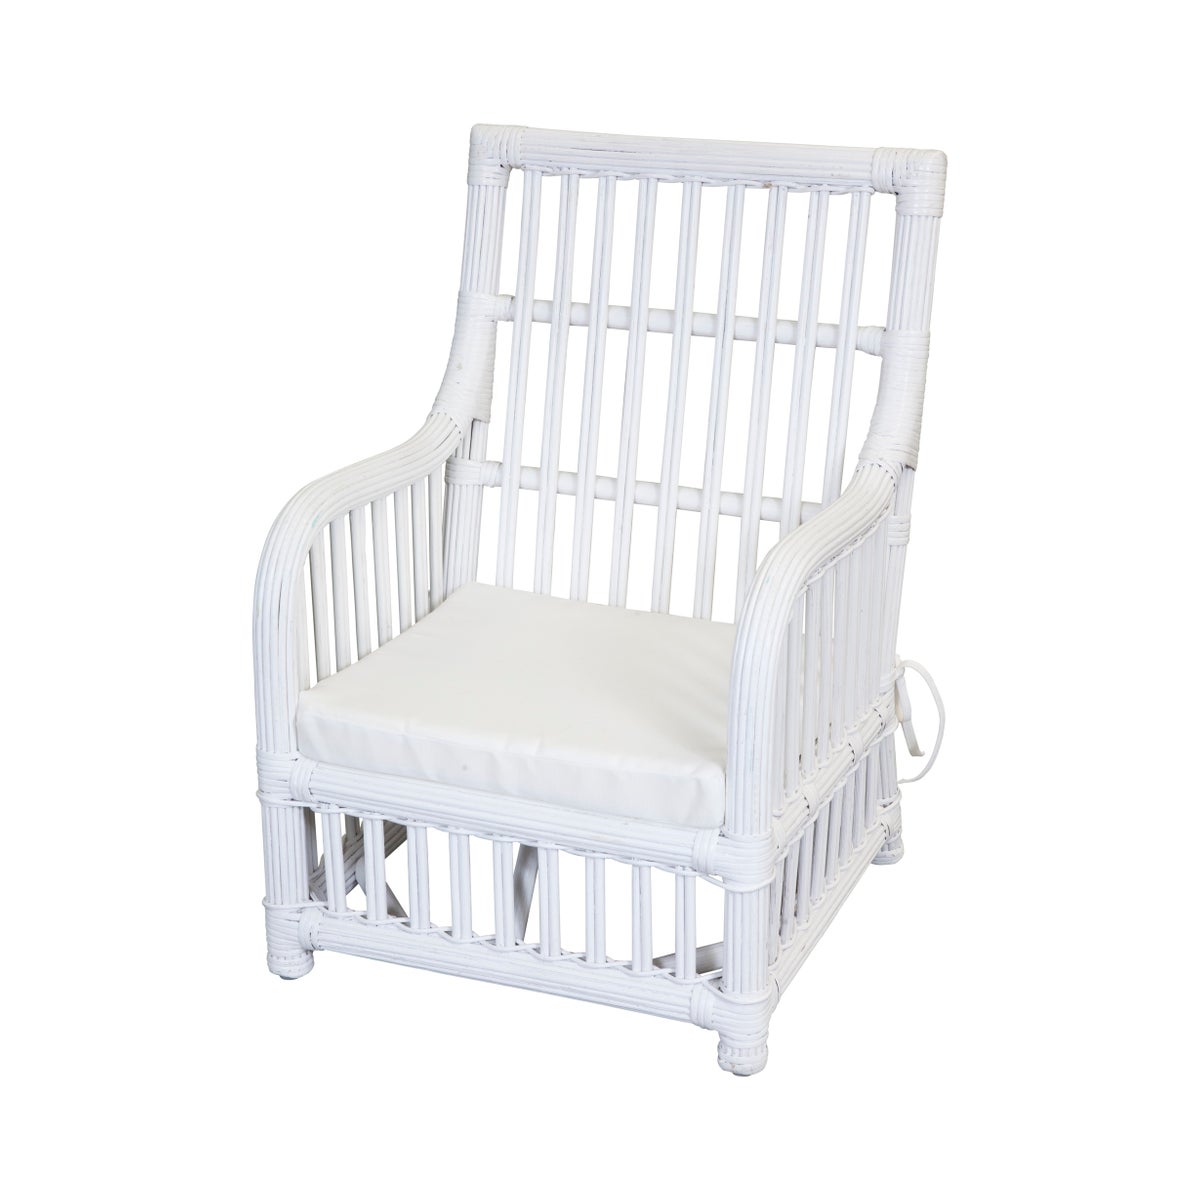 Child's Arm Lounge Chair